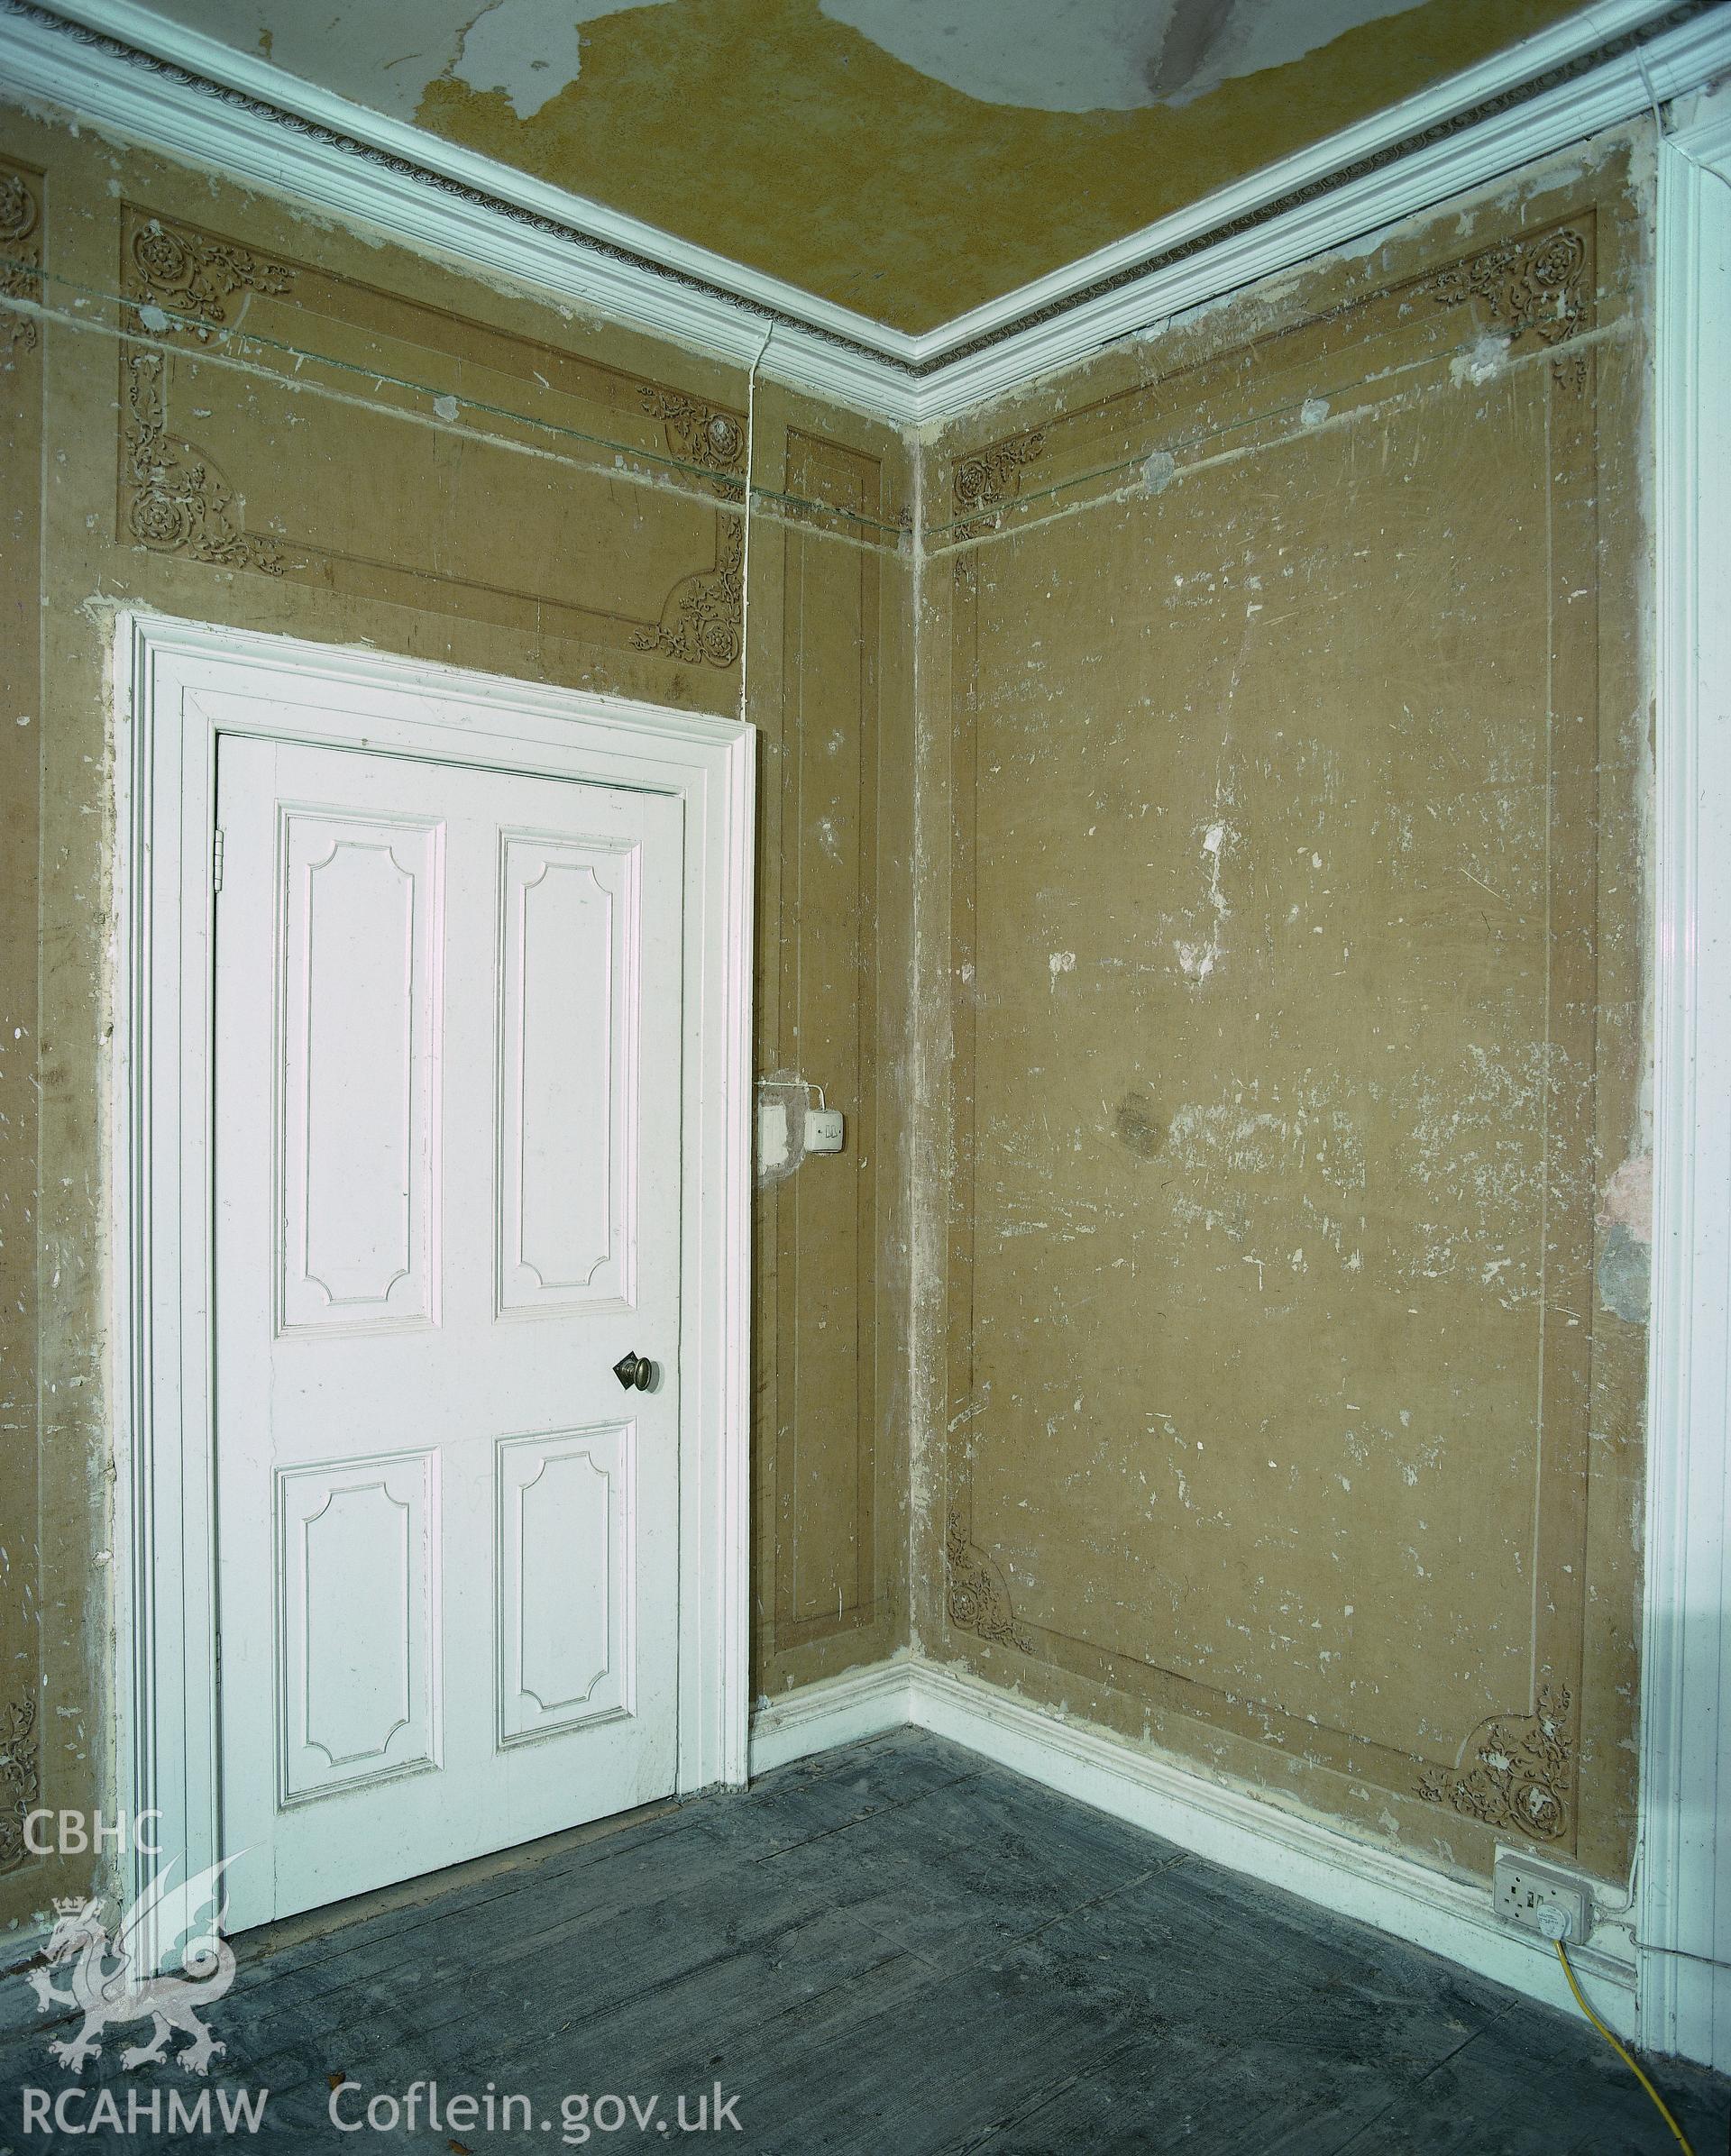 RCAHMW colour transparency showing decorative plasterwork at Rheola House, Resolven.